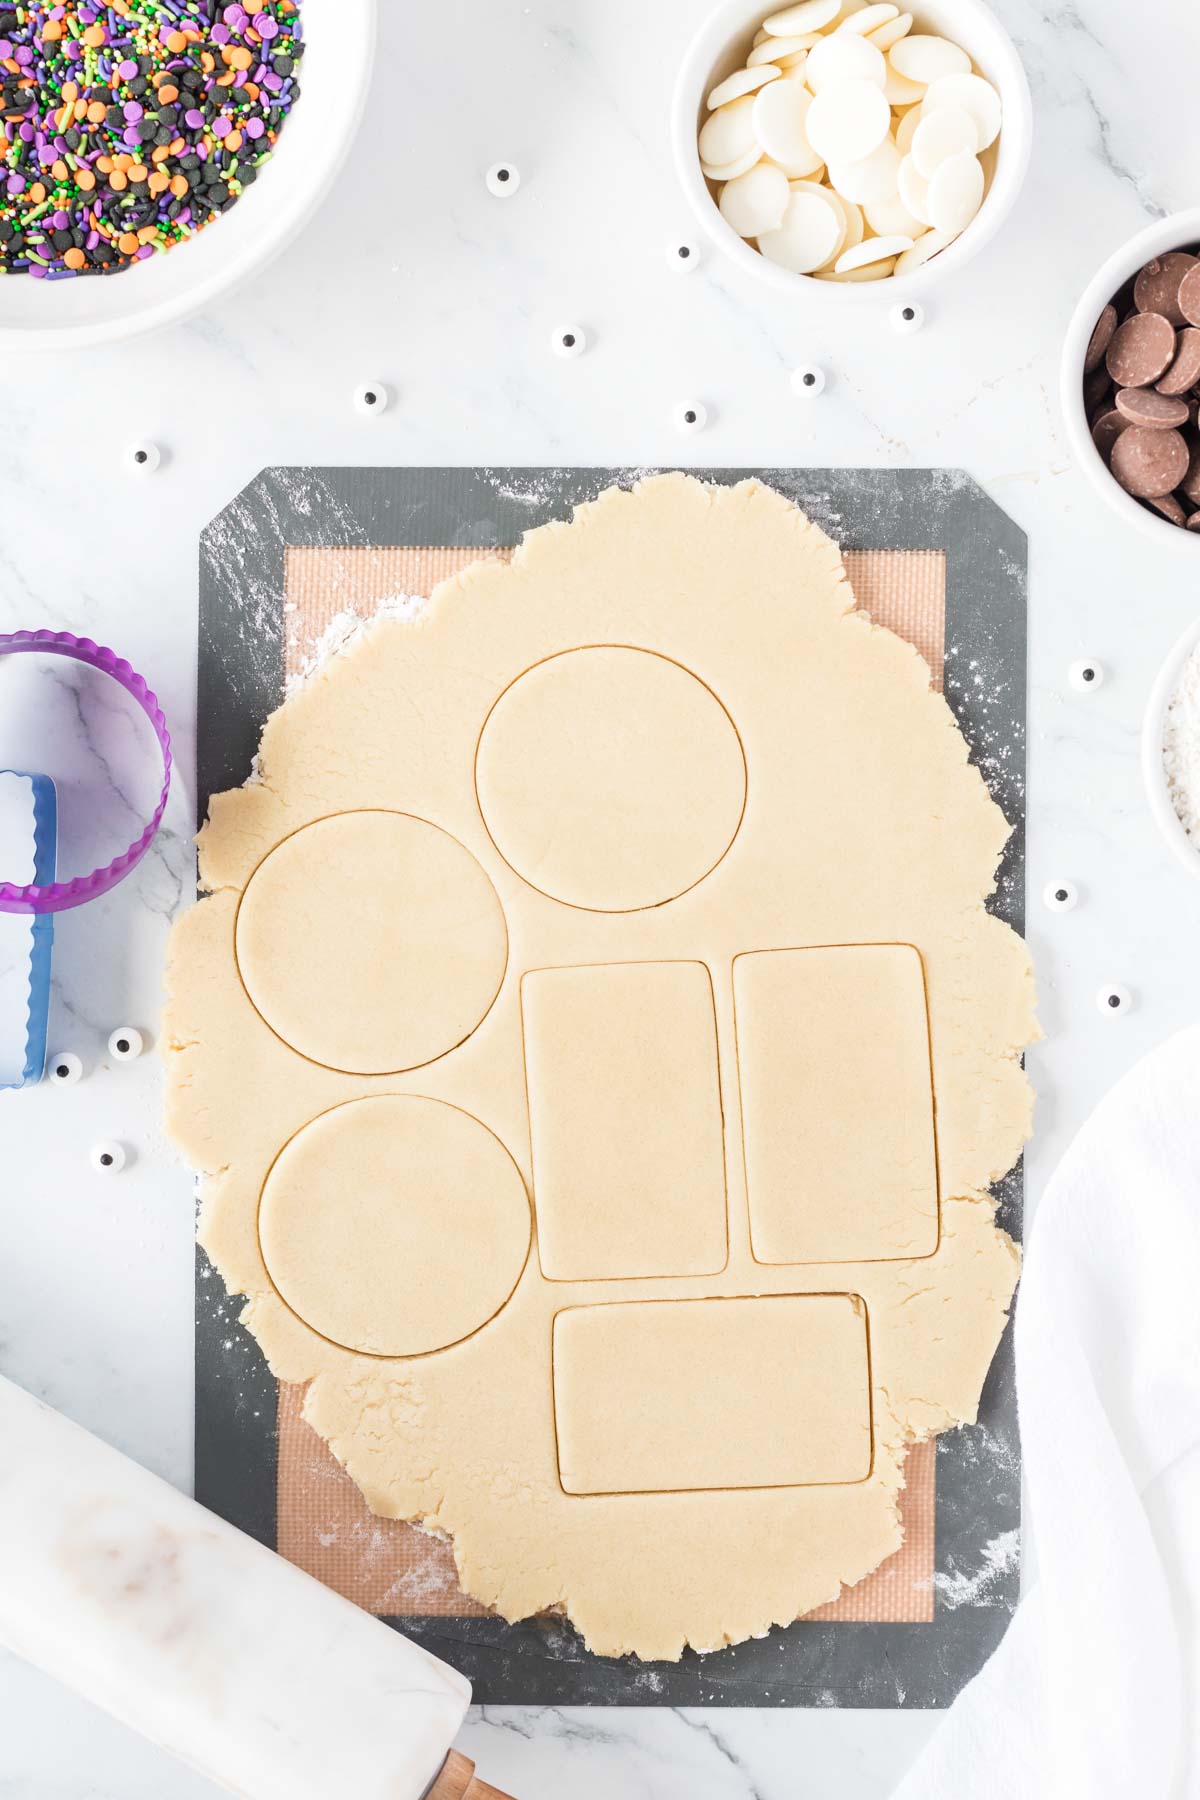 sugar cookie dough with cookie cut outs